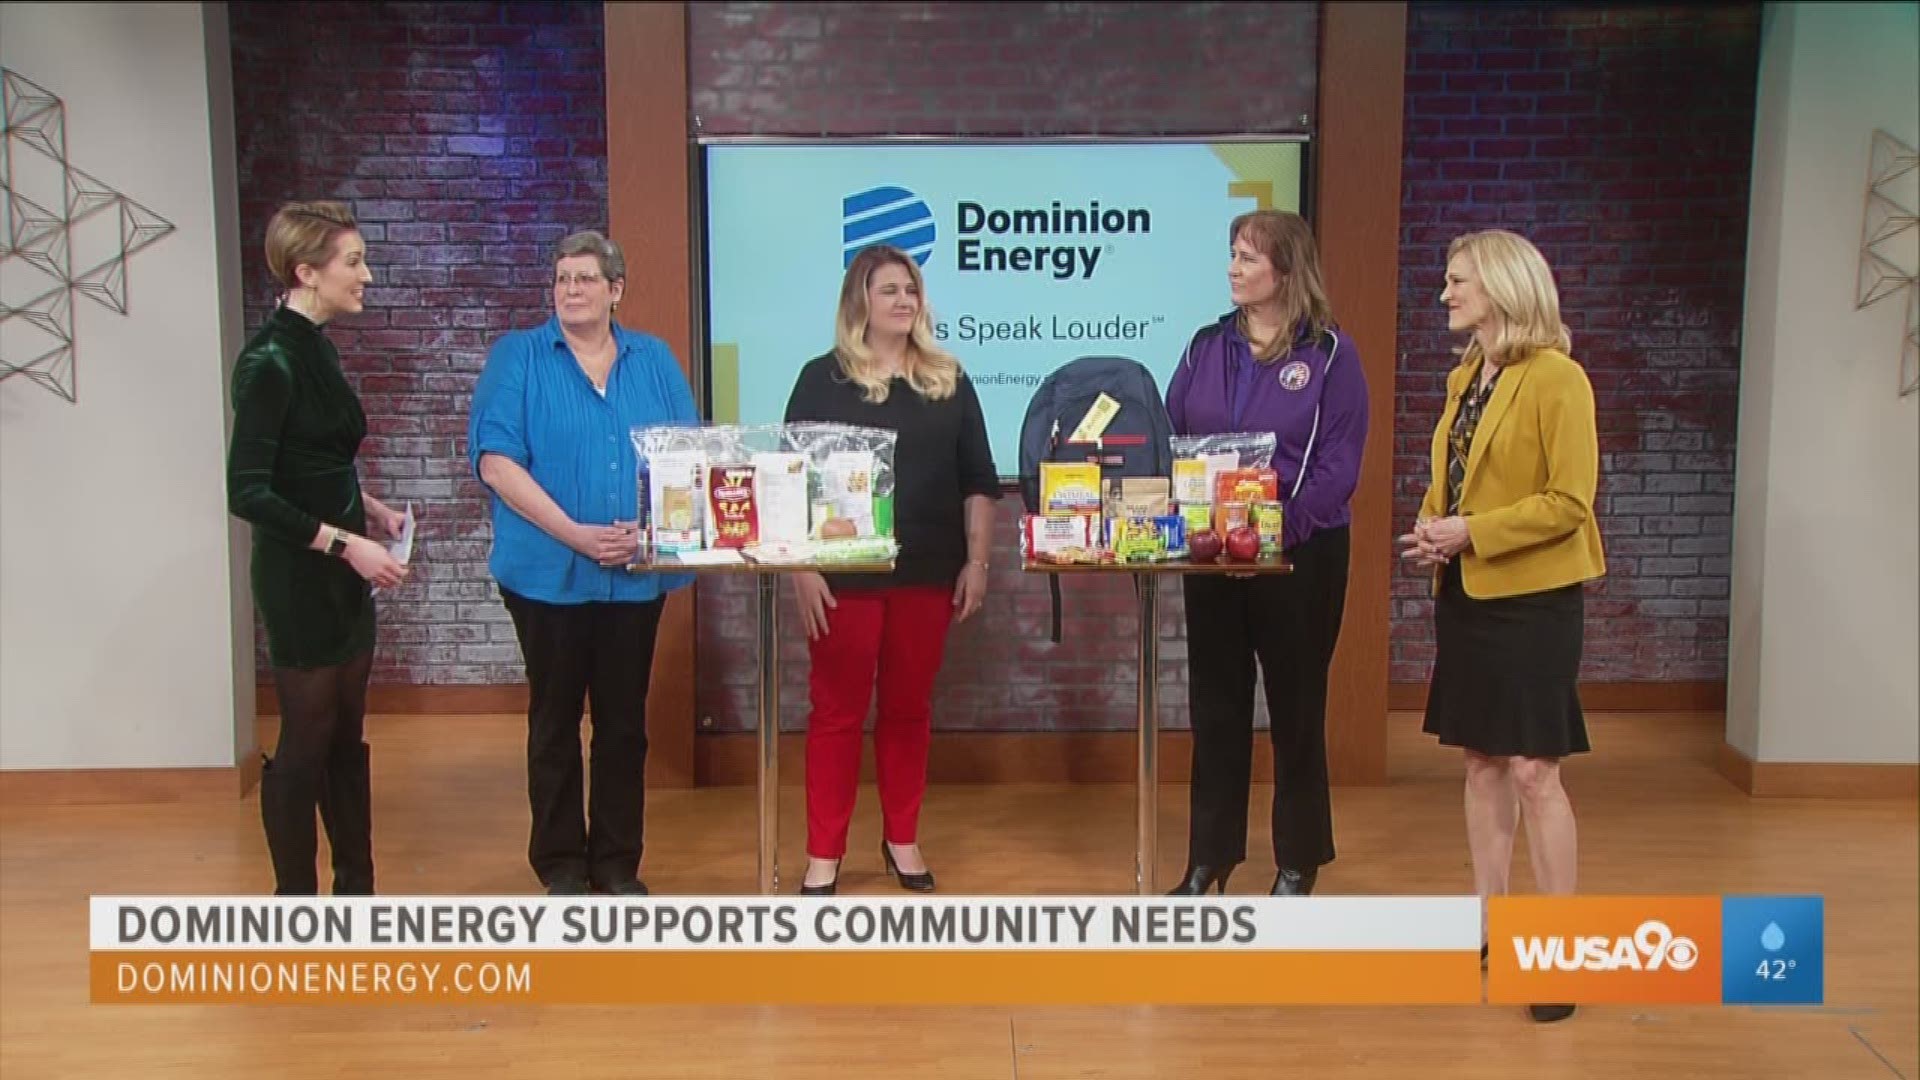 Dominion Energy spends 1.6 million dollars in grants to non-profit organizations, addressing veteran homelessness and food insecurity. Sponsored by Dominion Energy.